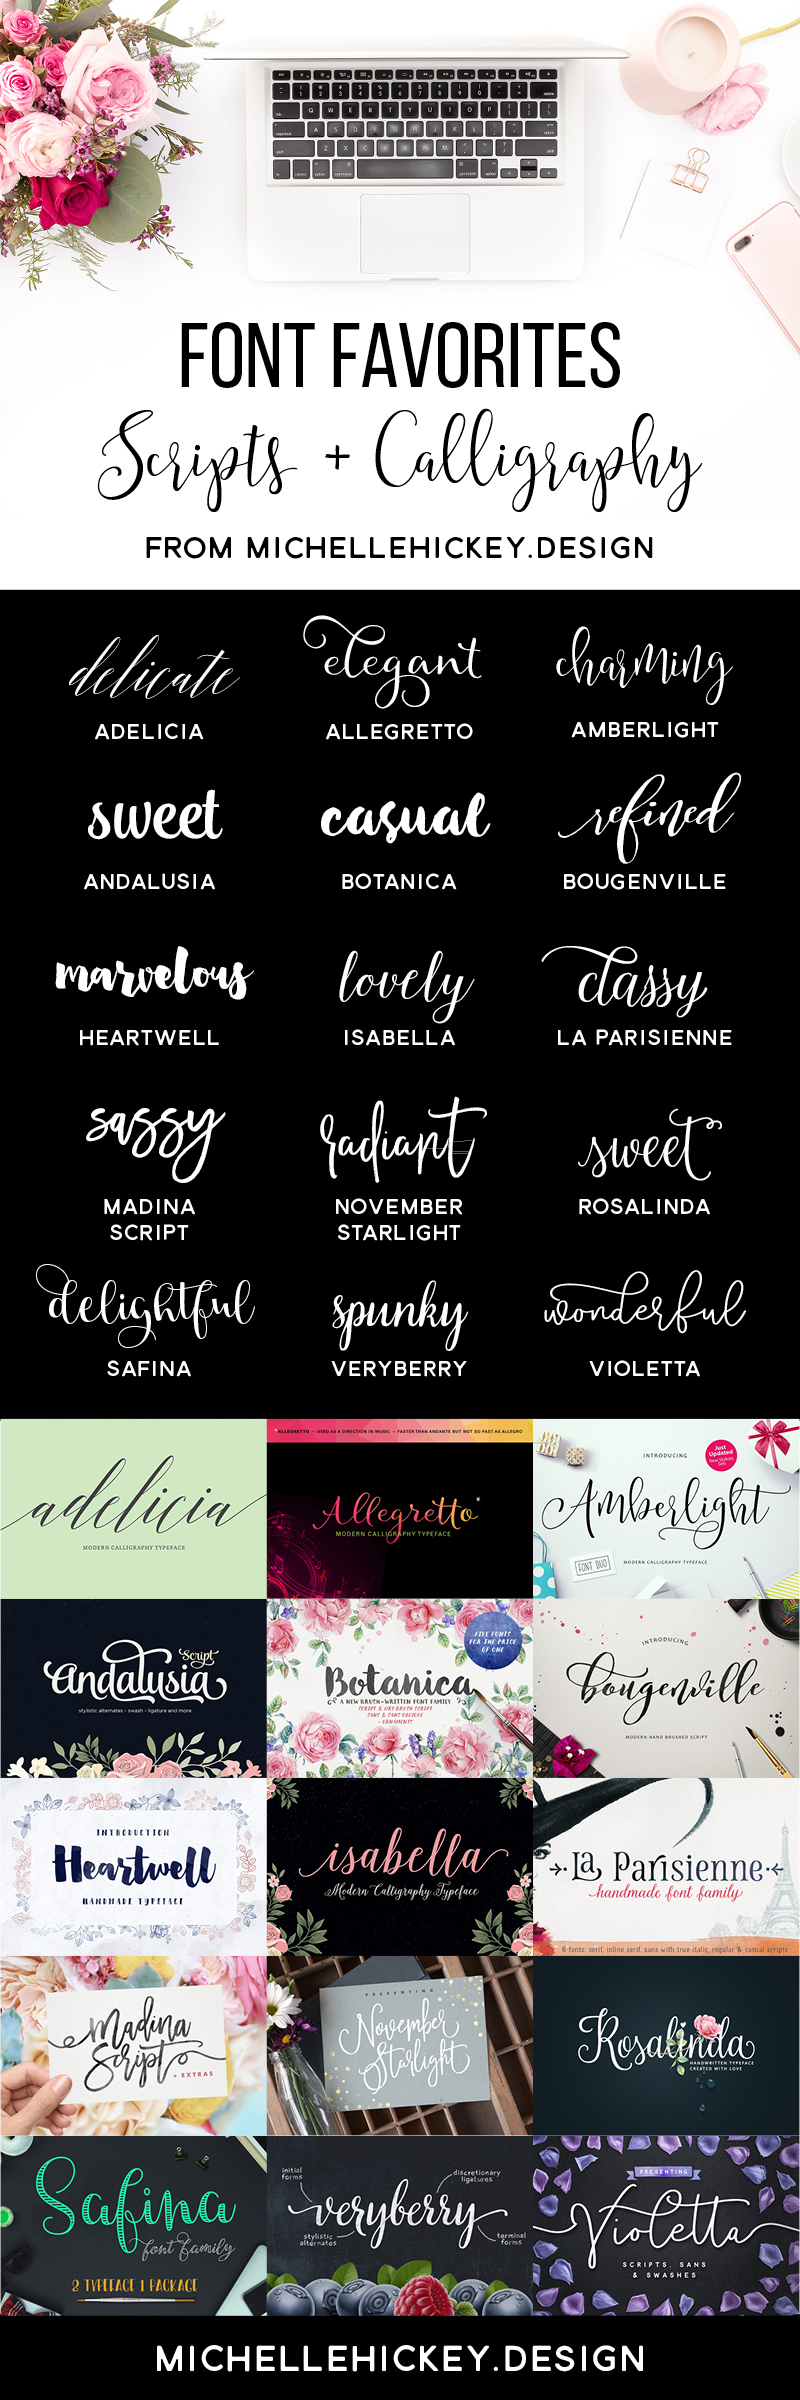 A collection of script fonts and calligraphic typefaces in a broad range of styles for all of your graphic design, DIY, or blogging projects. Most of these fonts families are under $20 and come with swashes, alternate ligatures and extras! // Roundup from MichelleHickey.Design